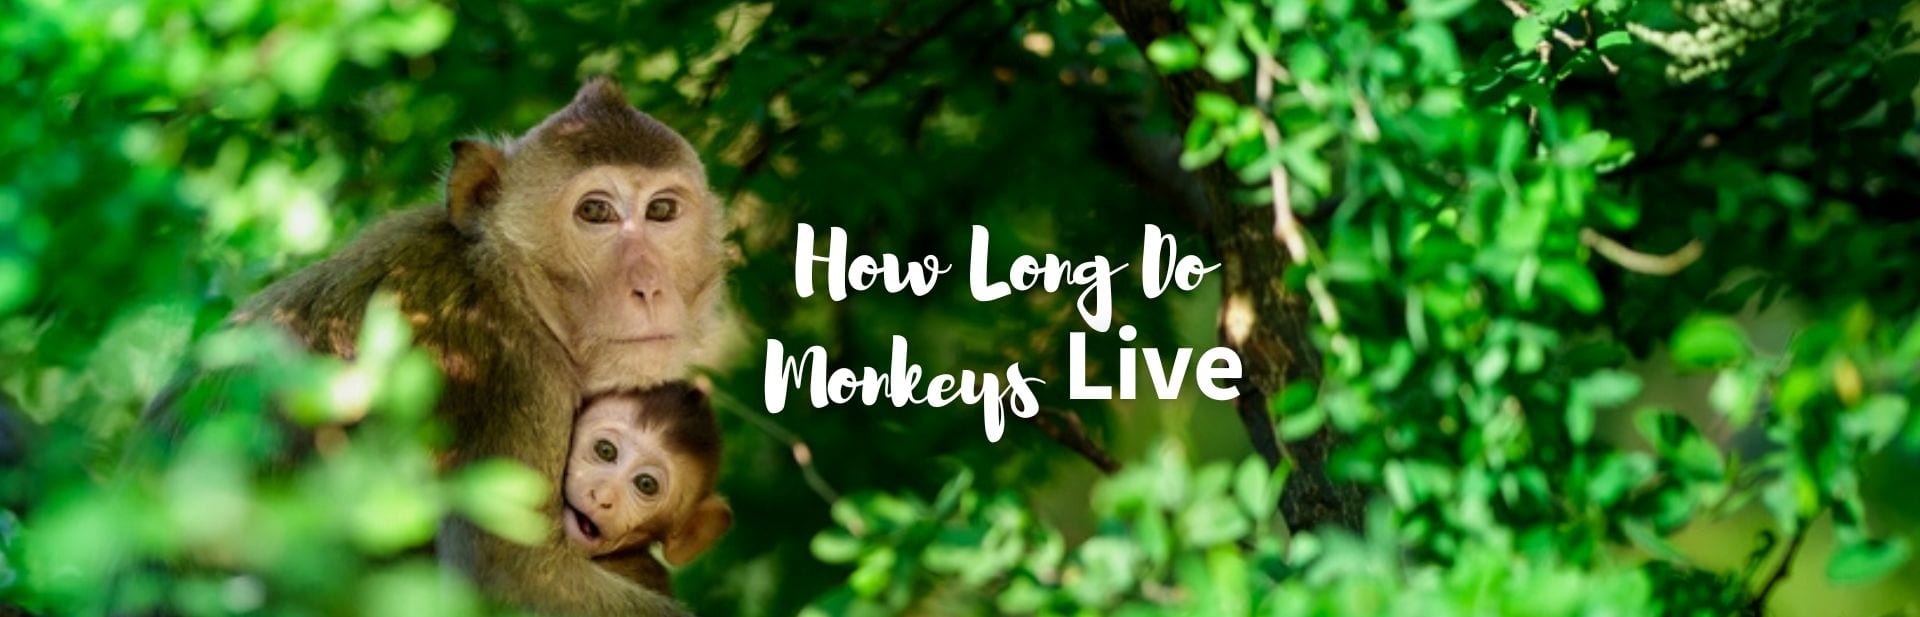 How Long Do Monkeys Live? From Old World to New World